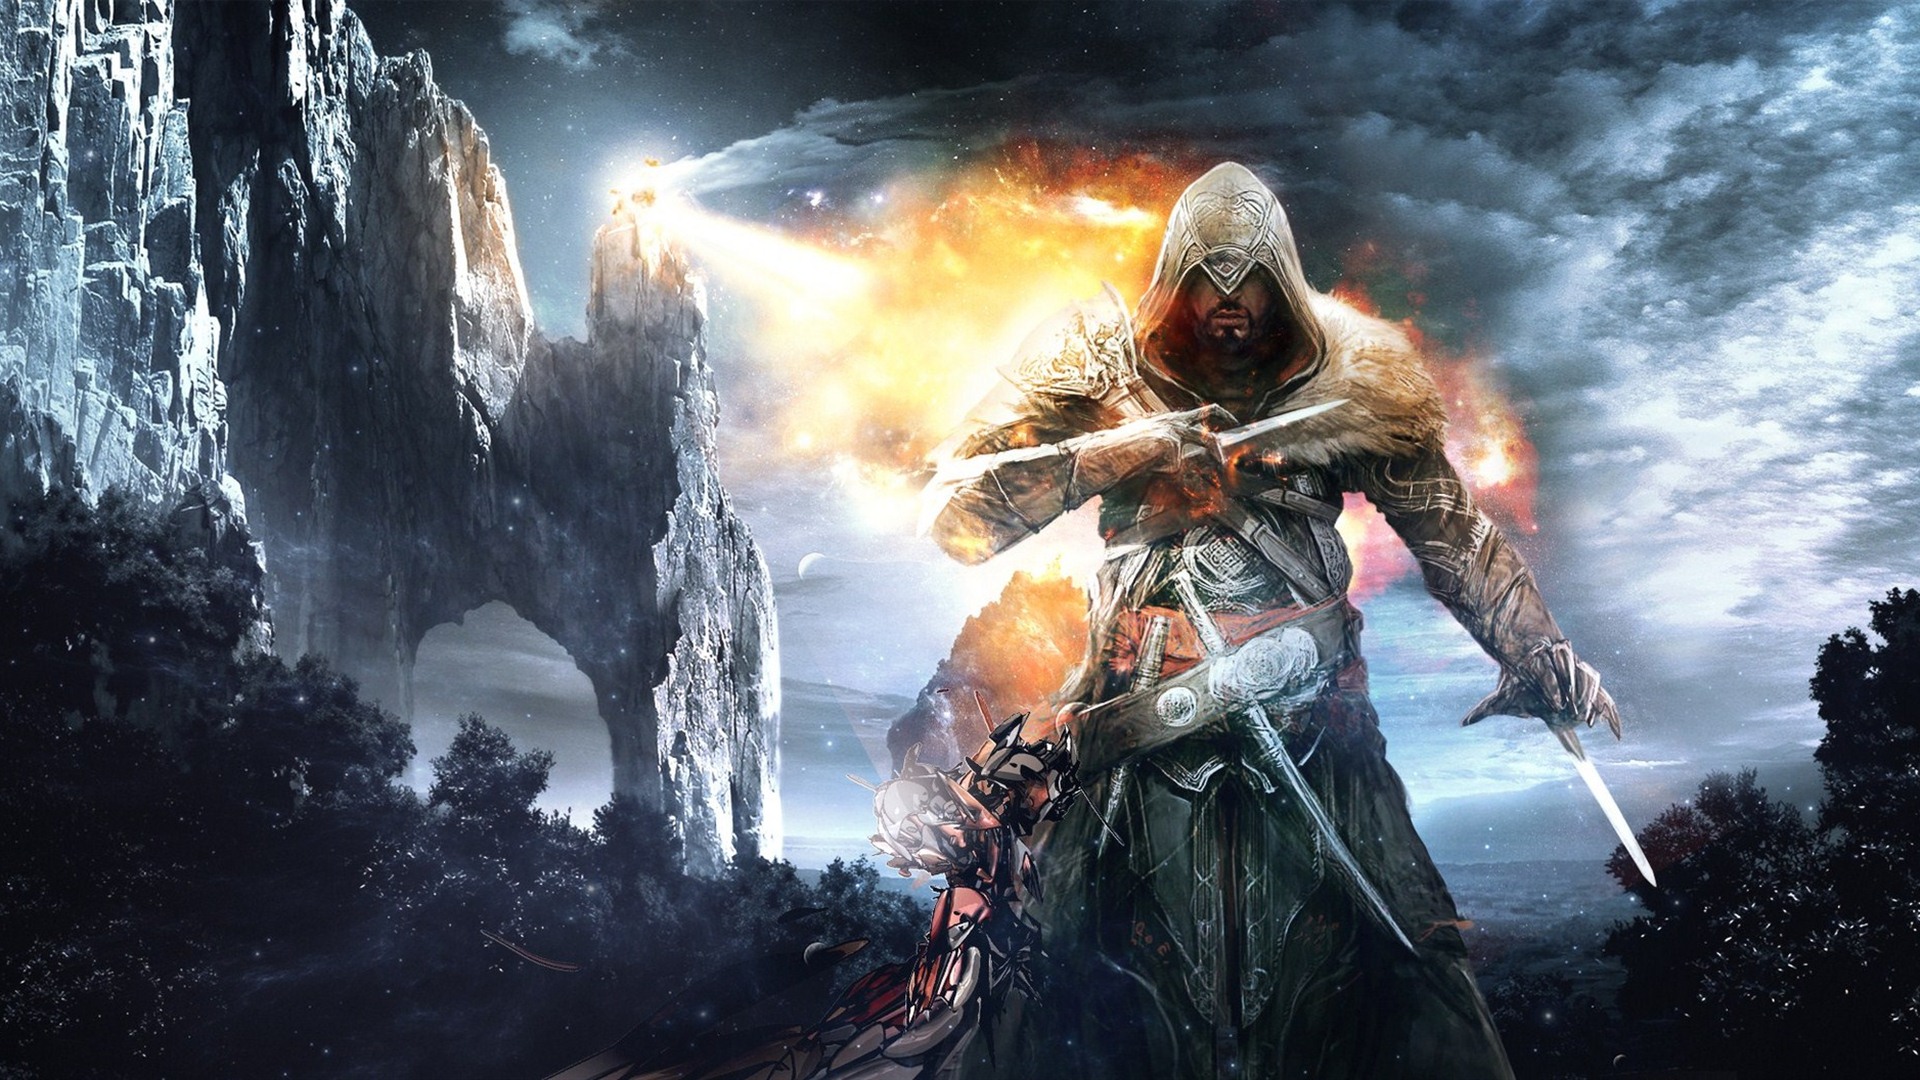 Assassin's Creed: Revelations HD wallpapers #11 - 1920x1080